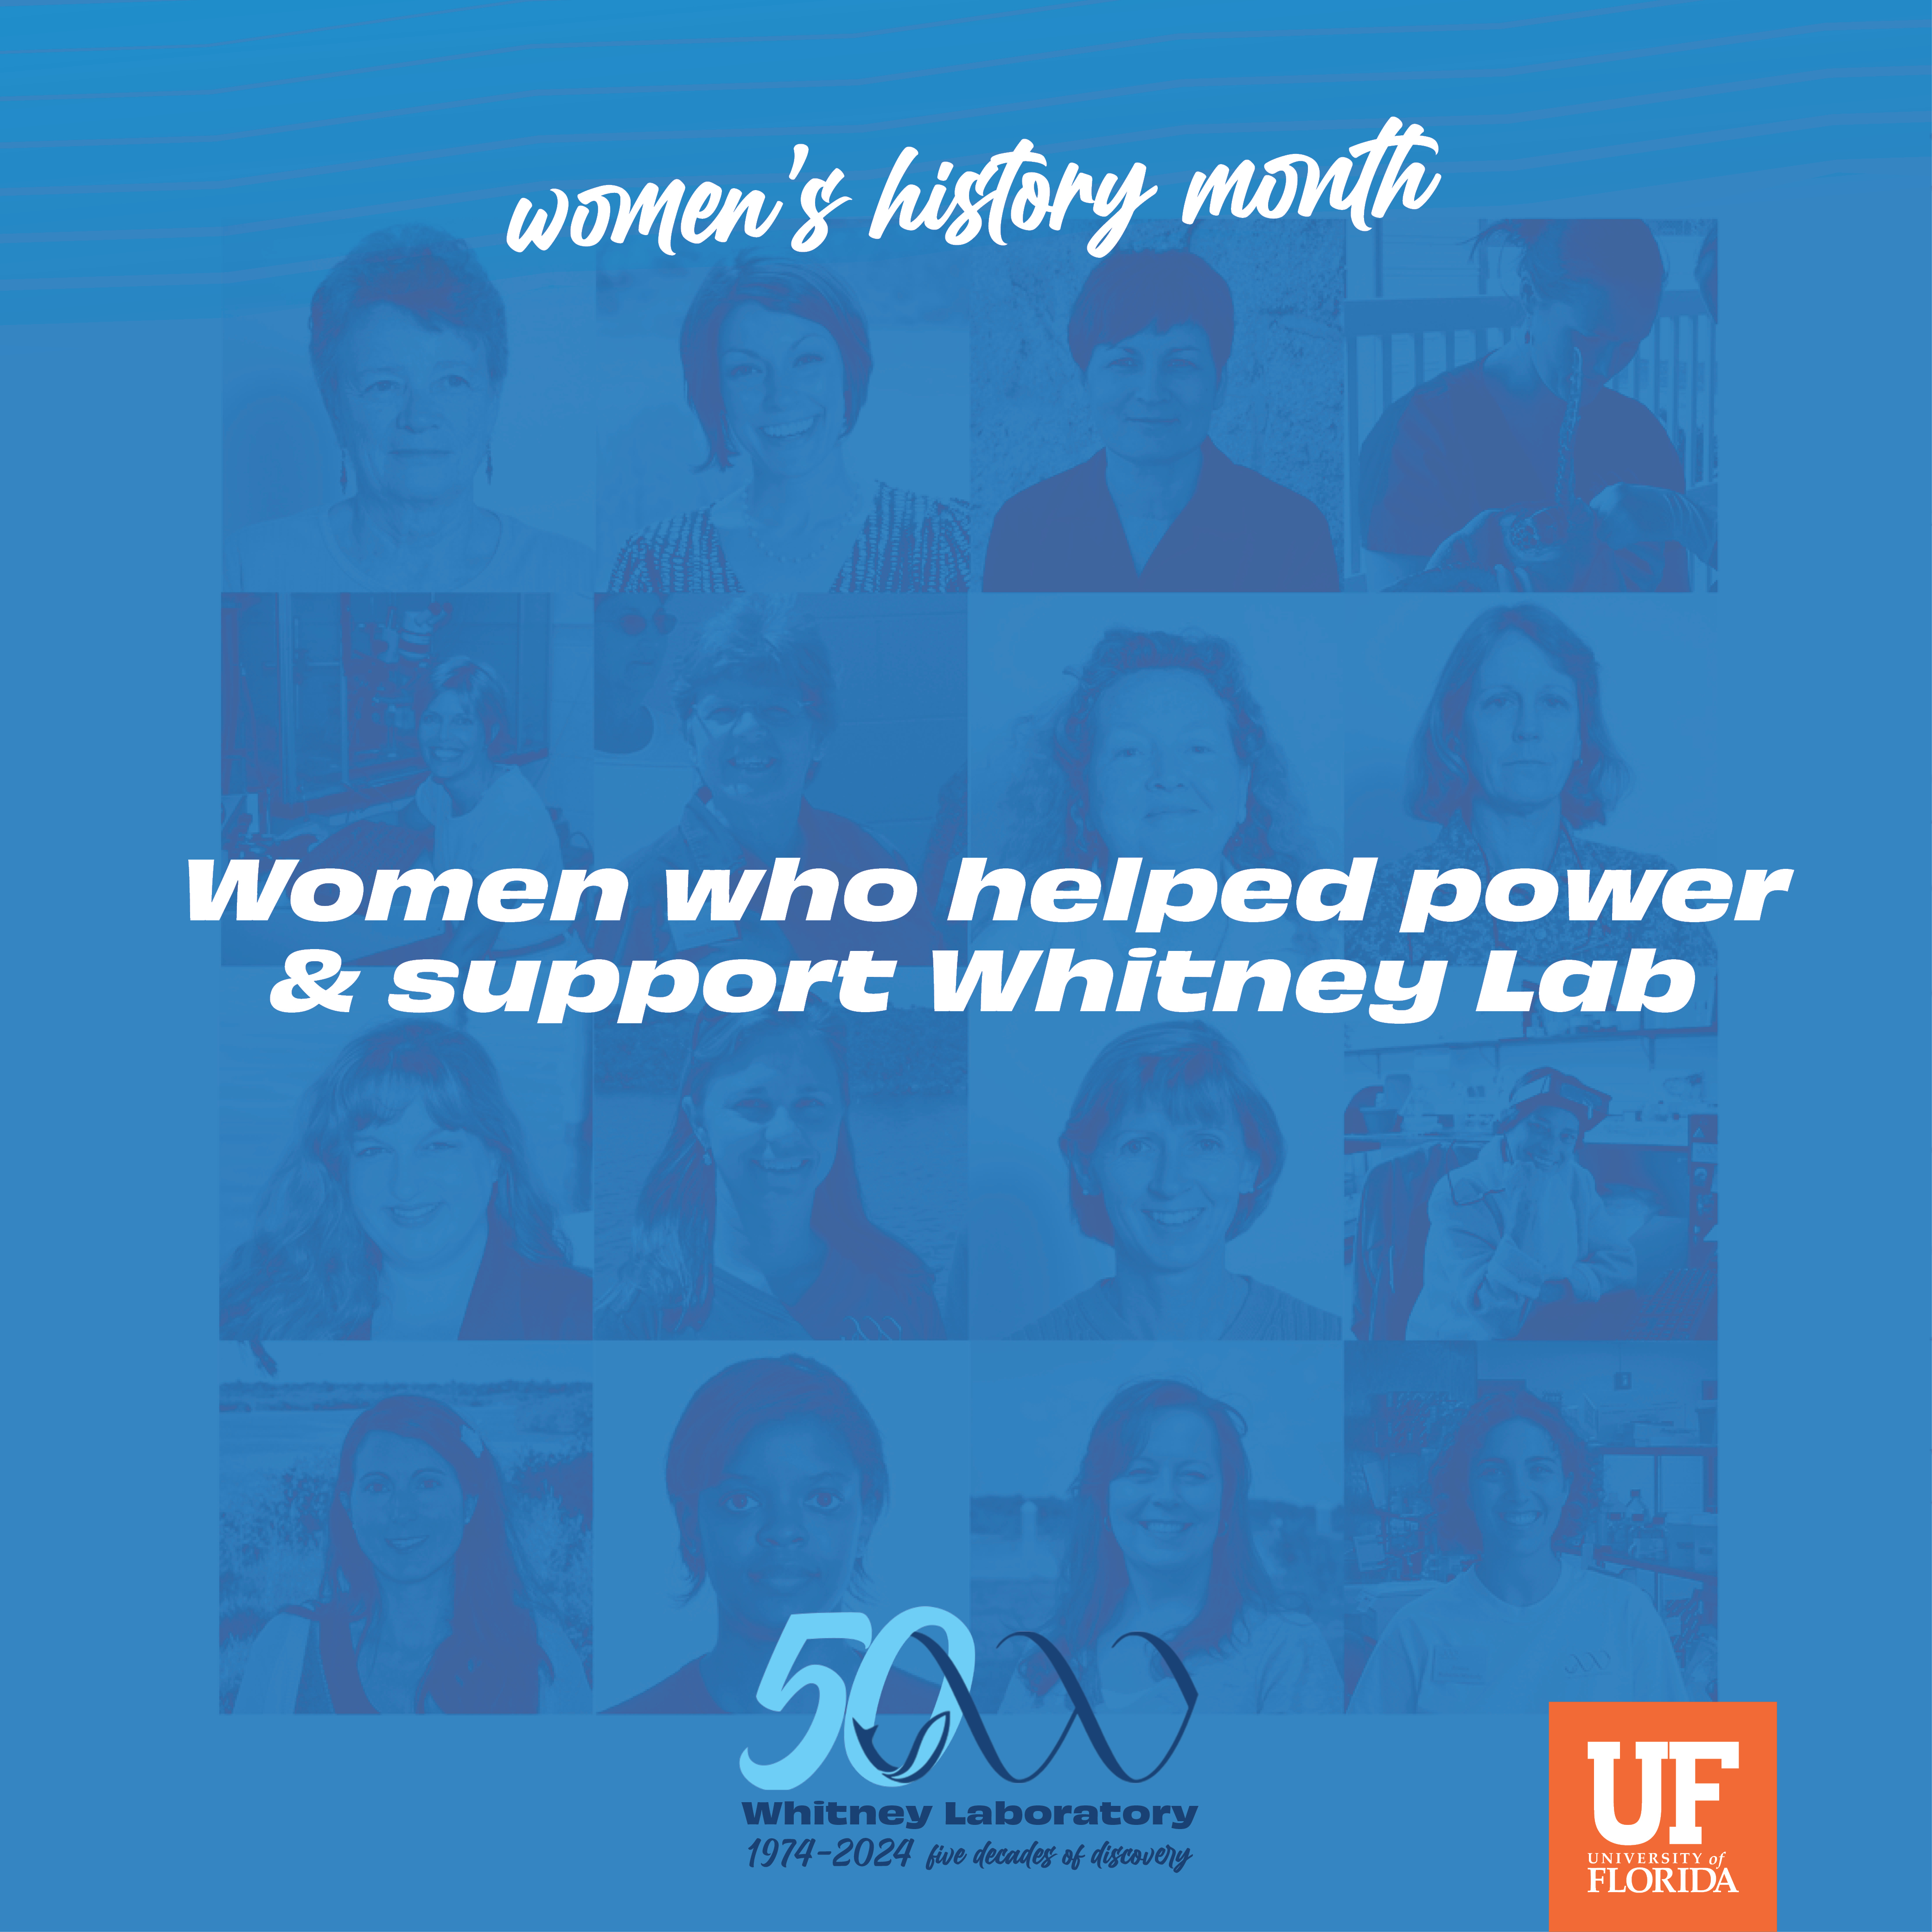 Women's History Month - Women Who Helped Power and Support the Lab